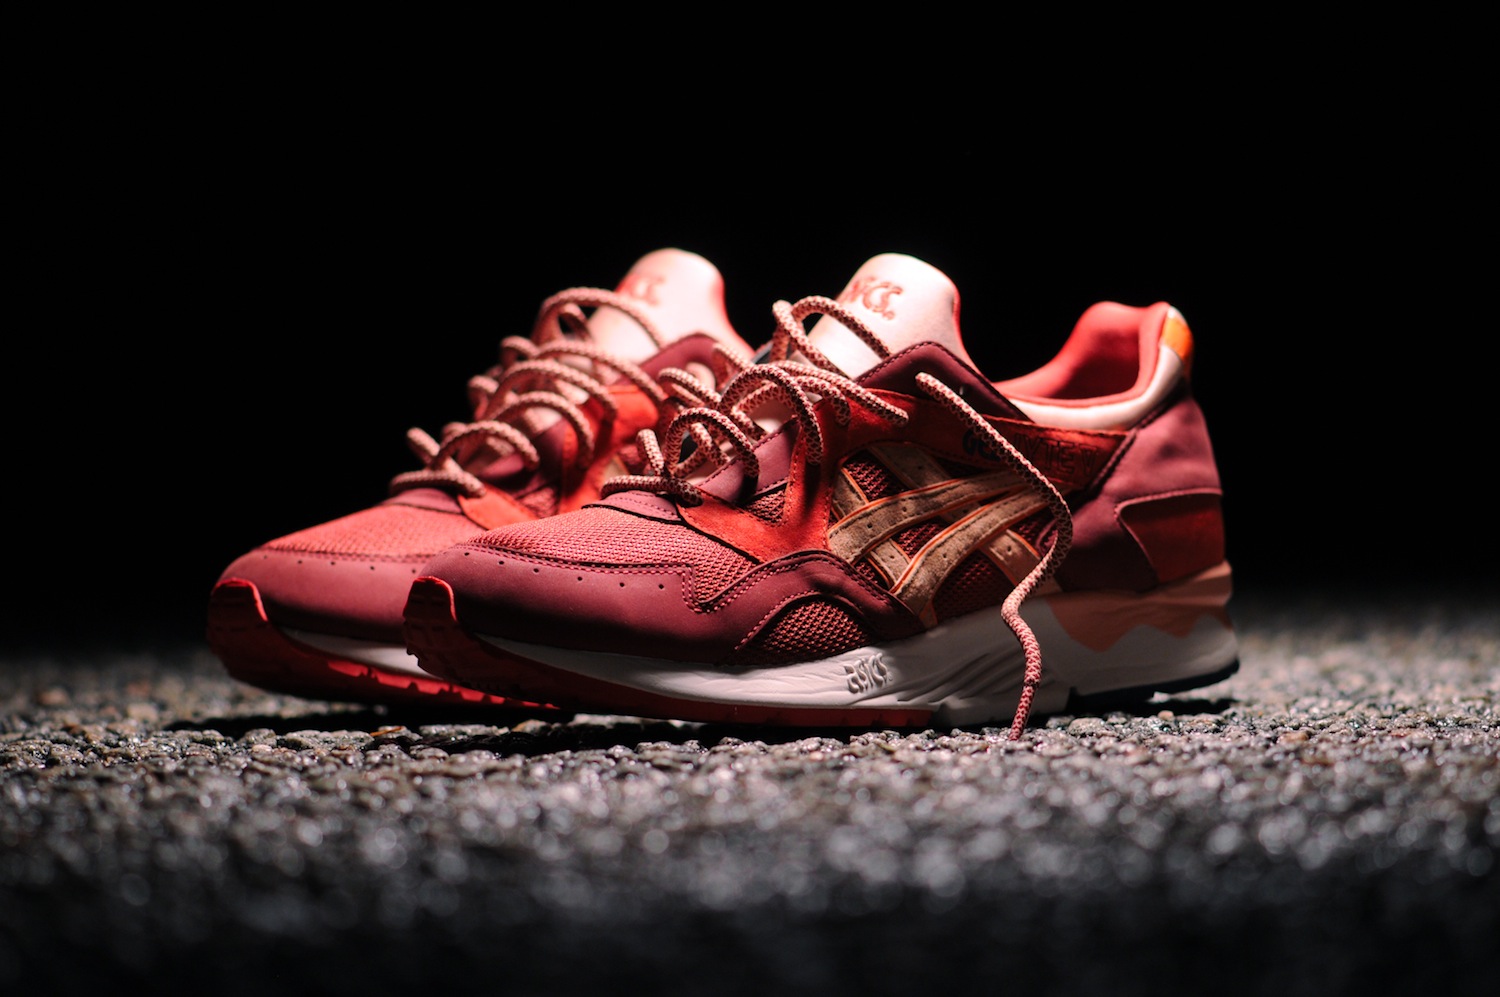 Top 10 Collaborations of October 2013 Ronnie Fieg x ASICS Gel Lyte V Volcano